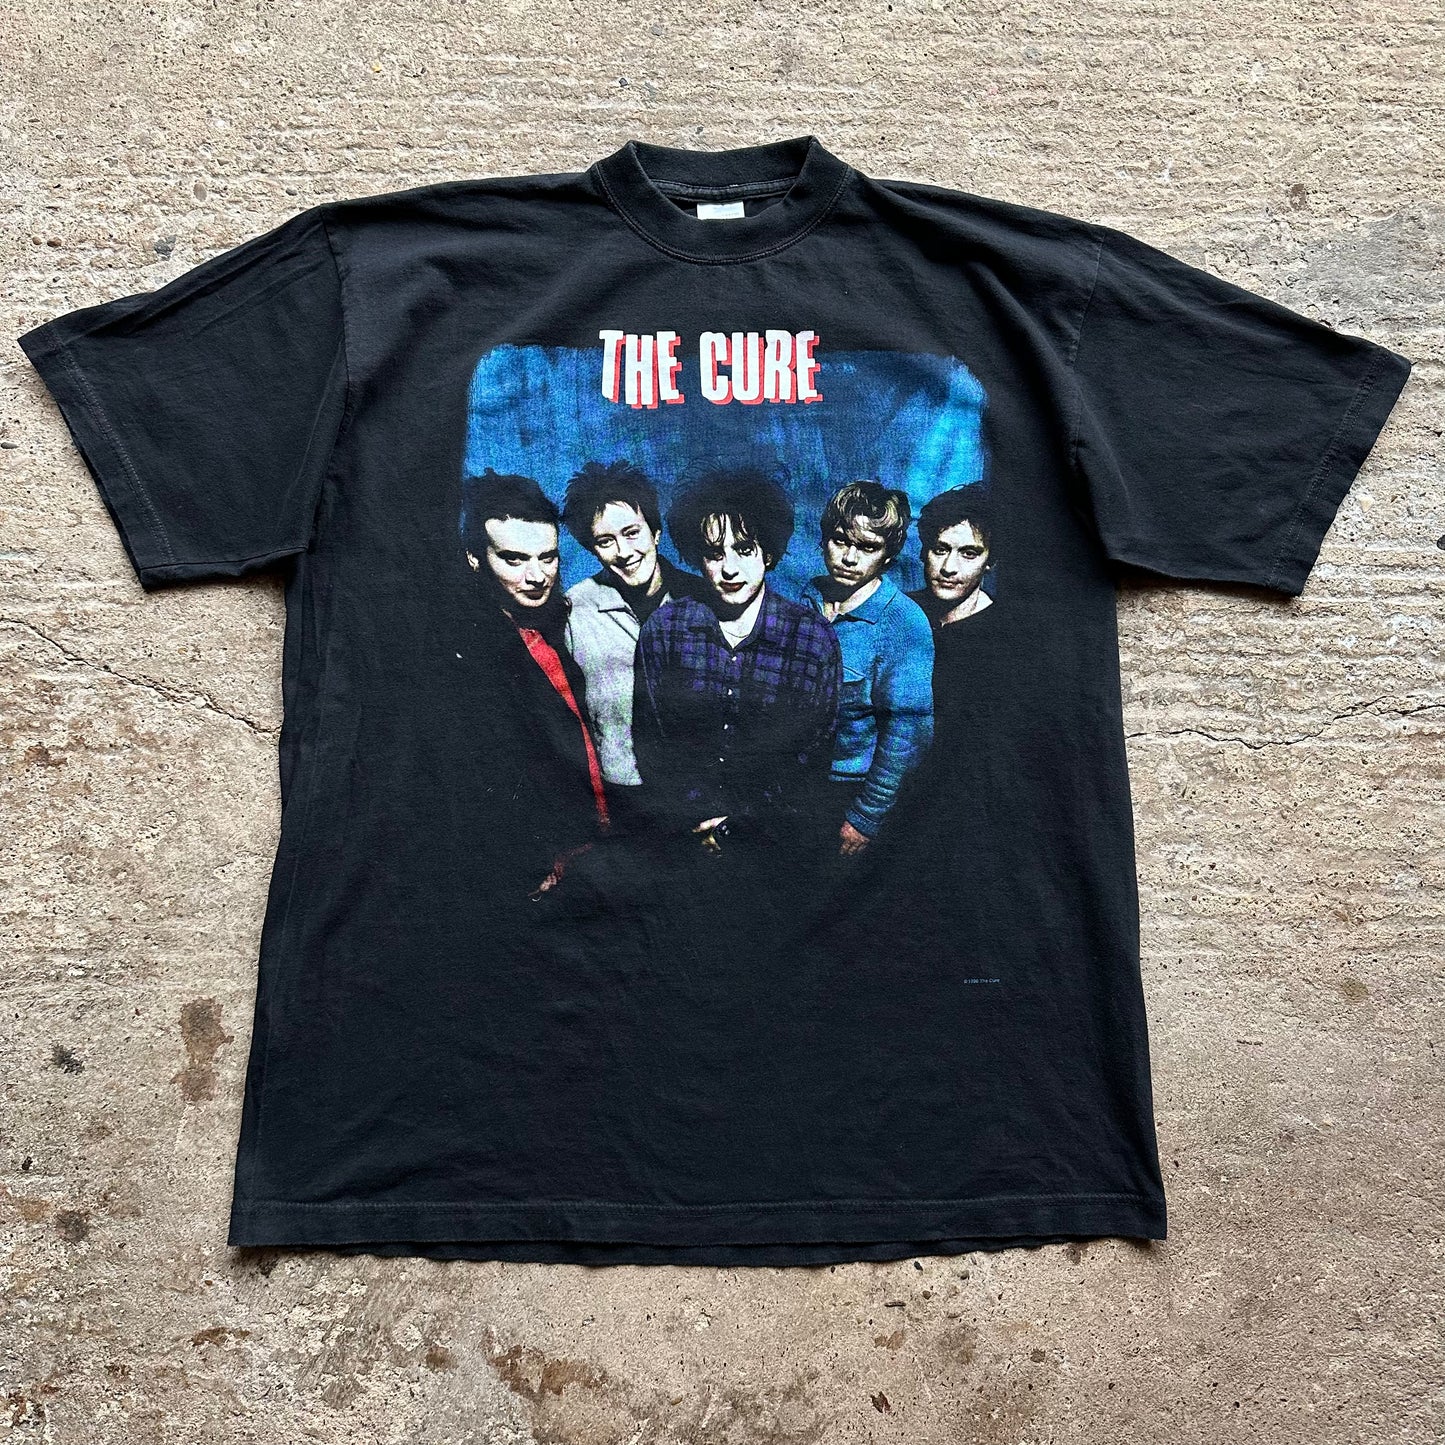 The Cure - 'Swing Tour' - 1996 - XL